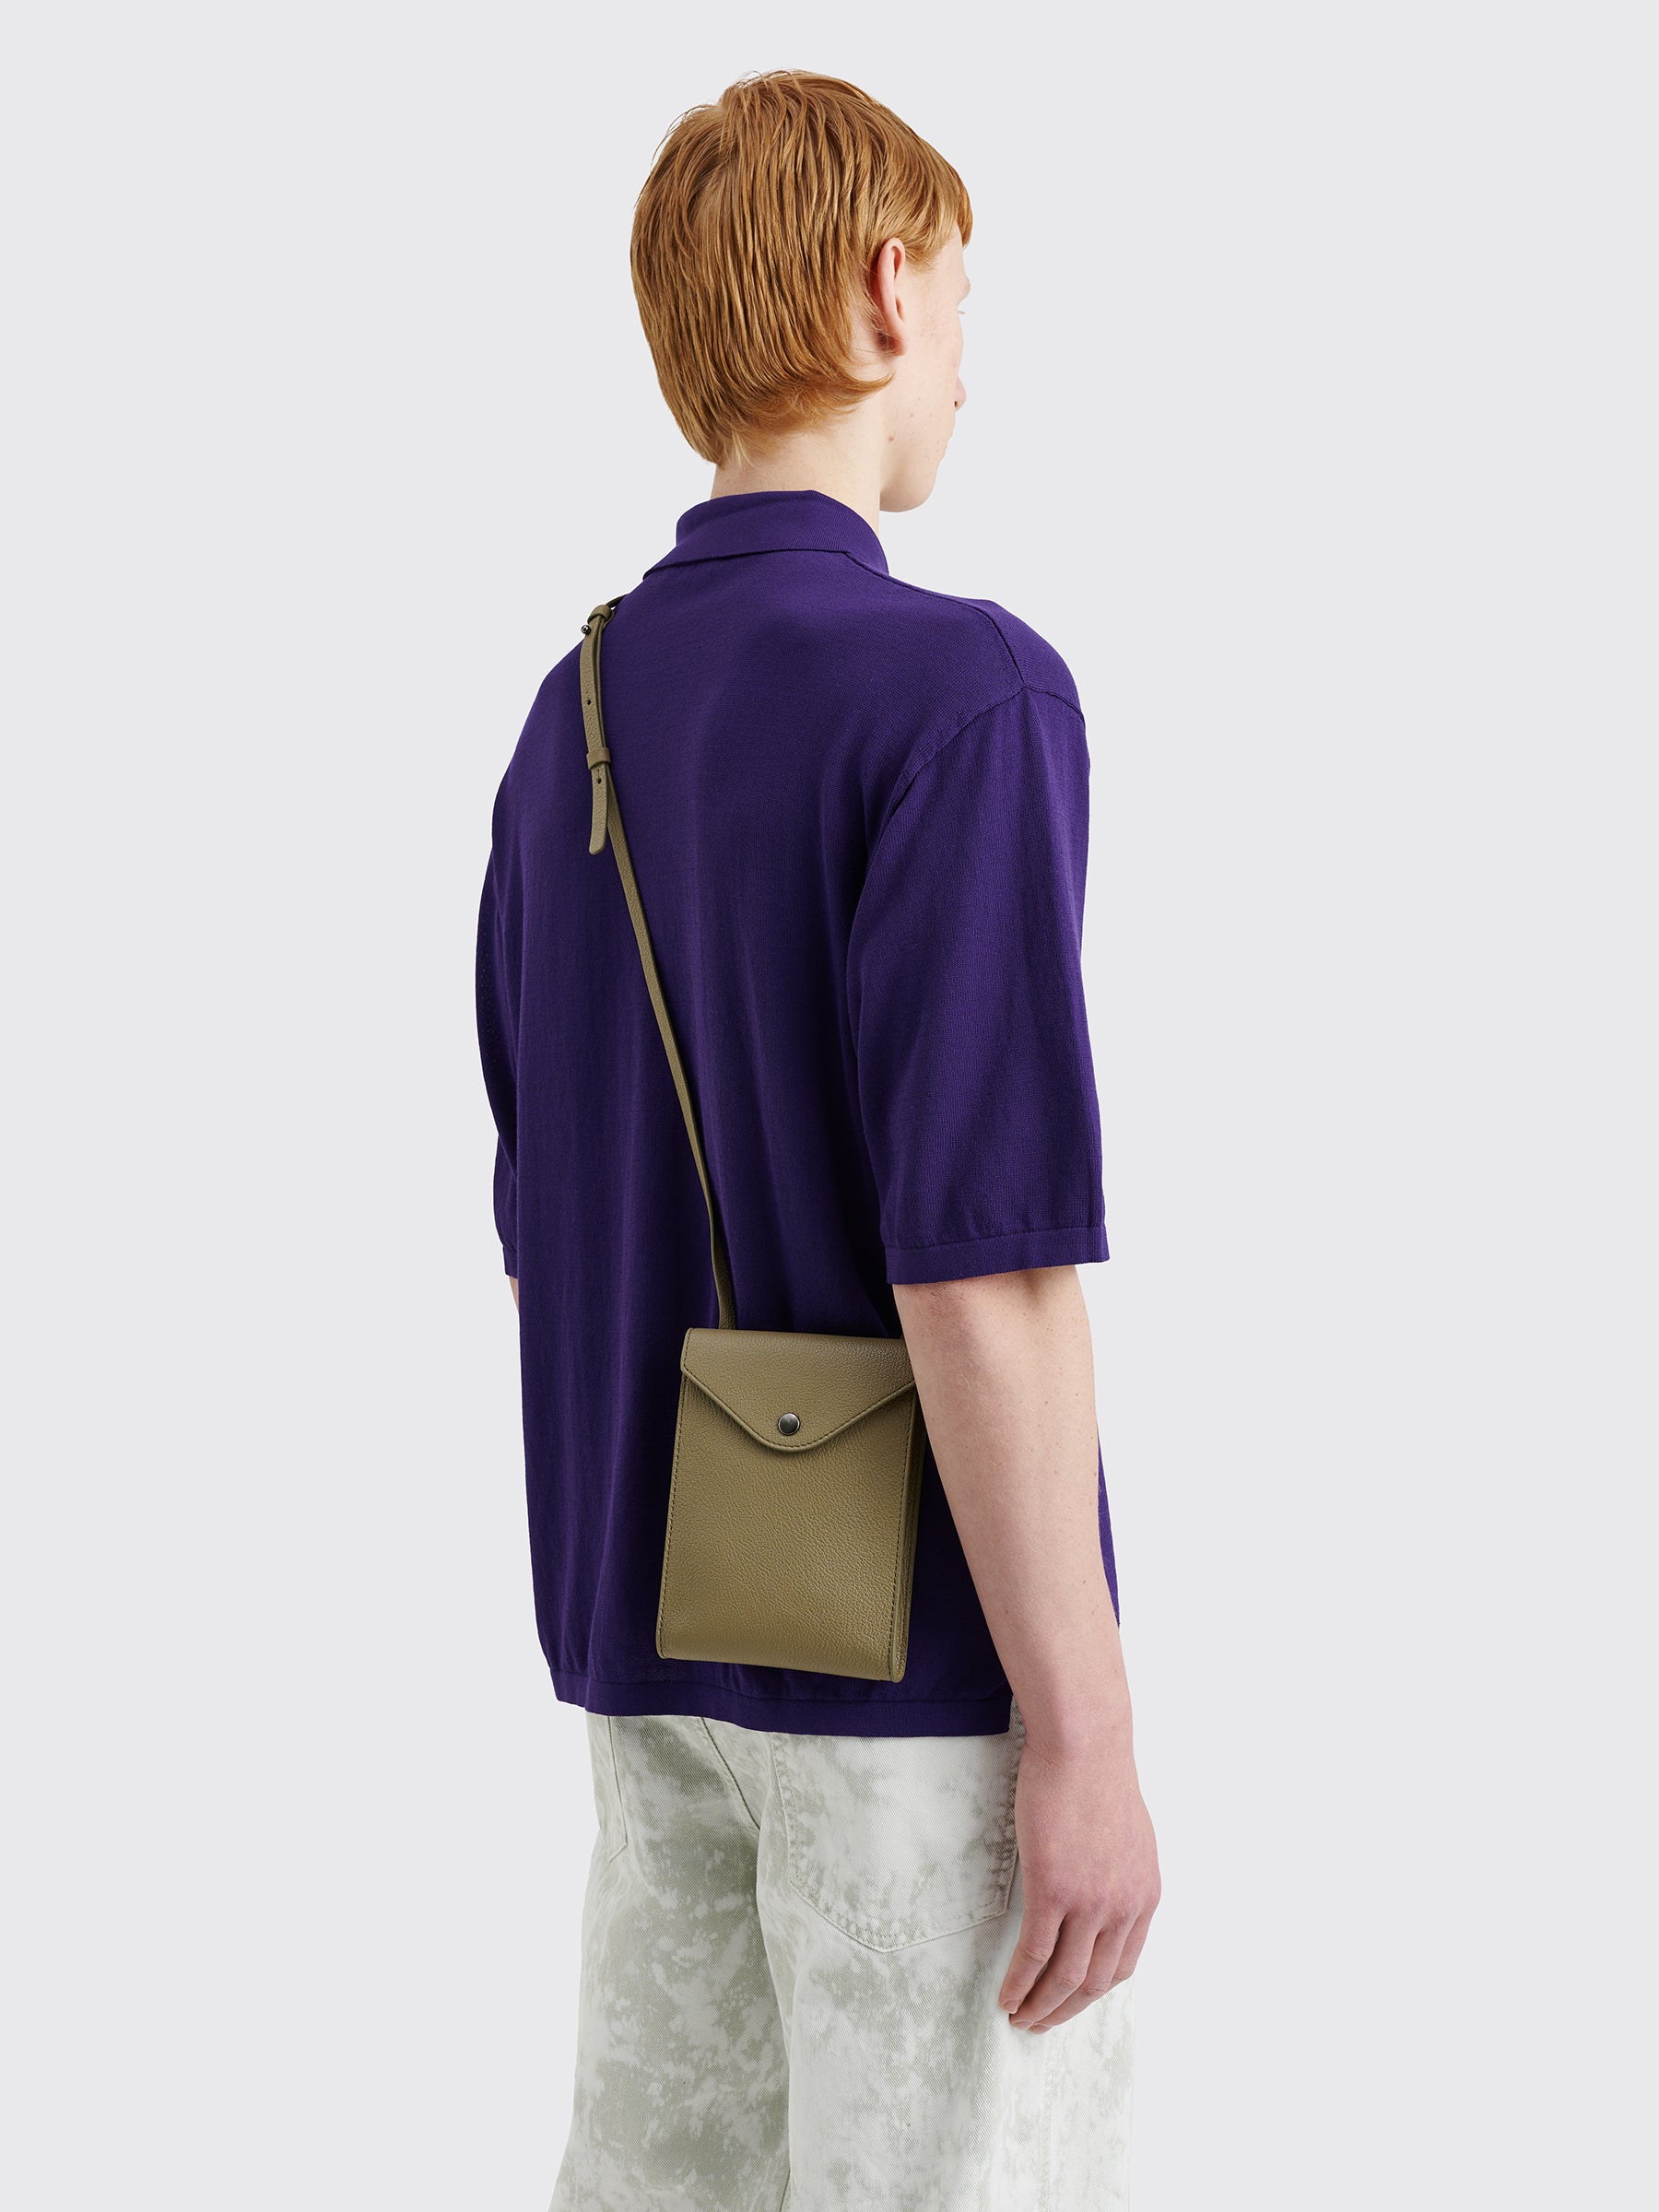 Lemaire Envelope With Strap Dusty Khaki